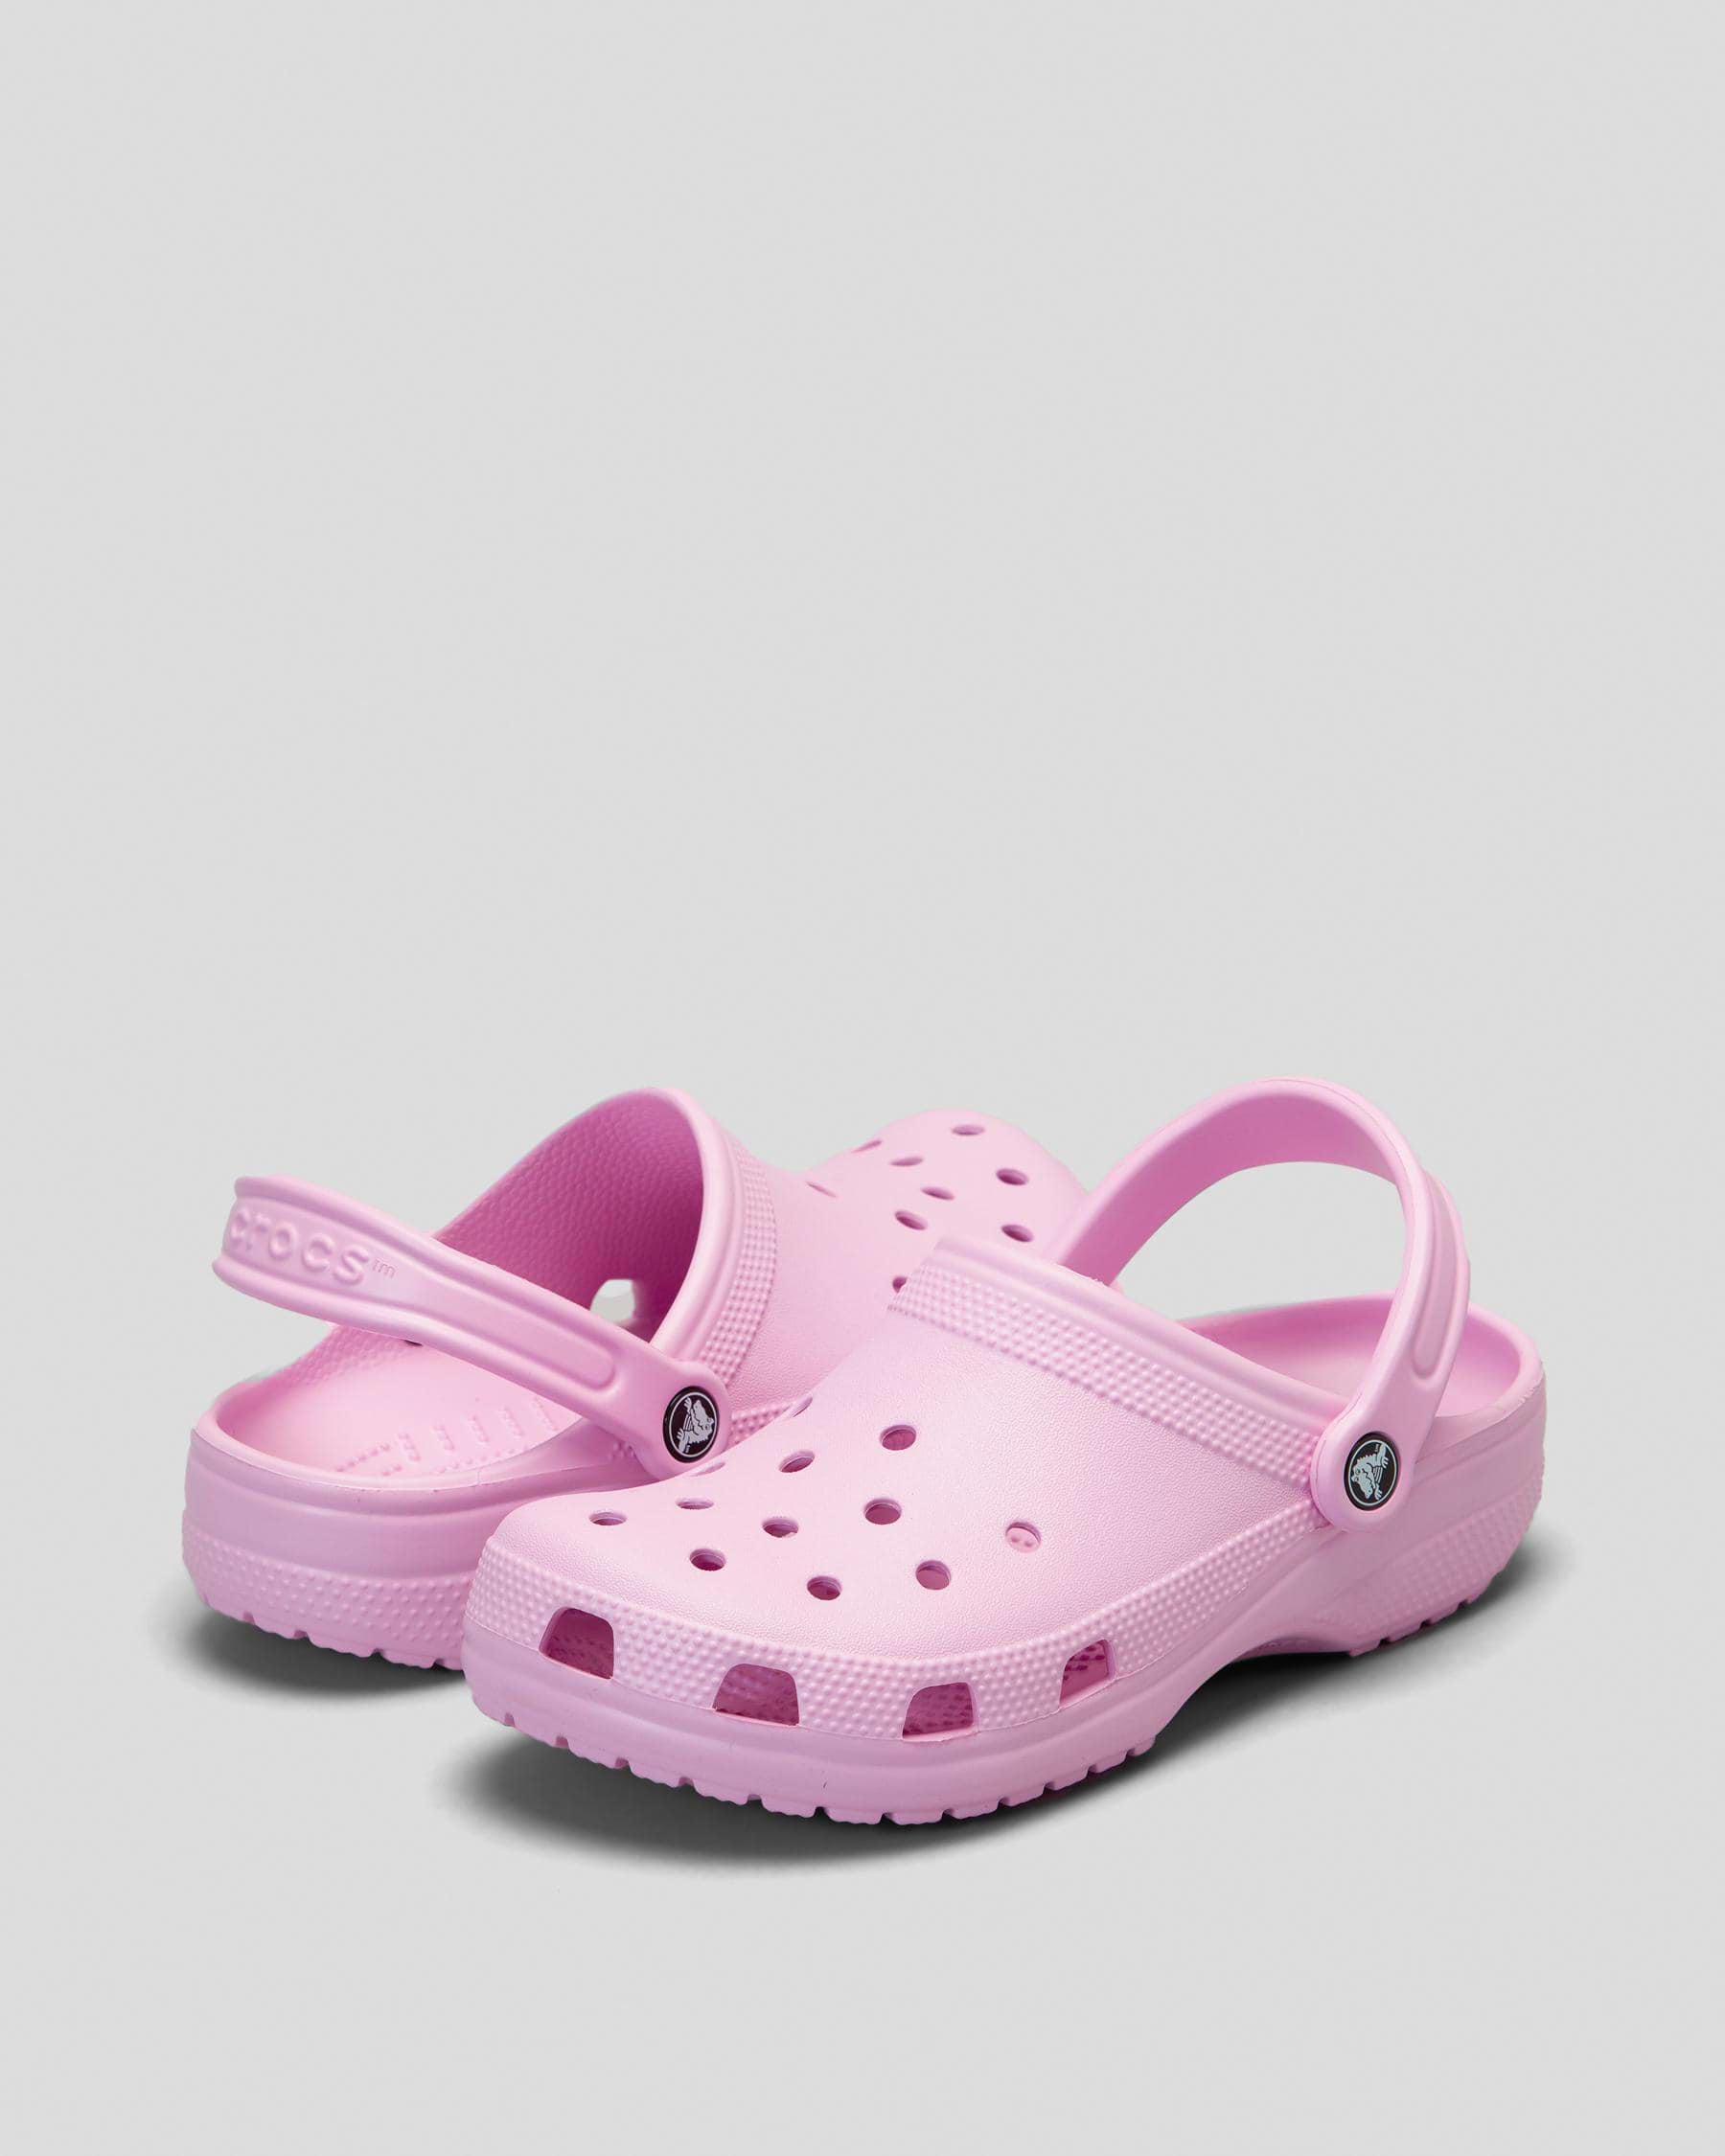 Crocs Classic Clogs In Ballerina Pink - FREE* Shipping & Easy Returns - City United States